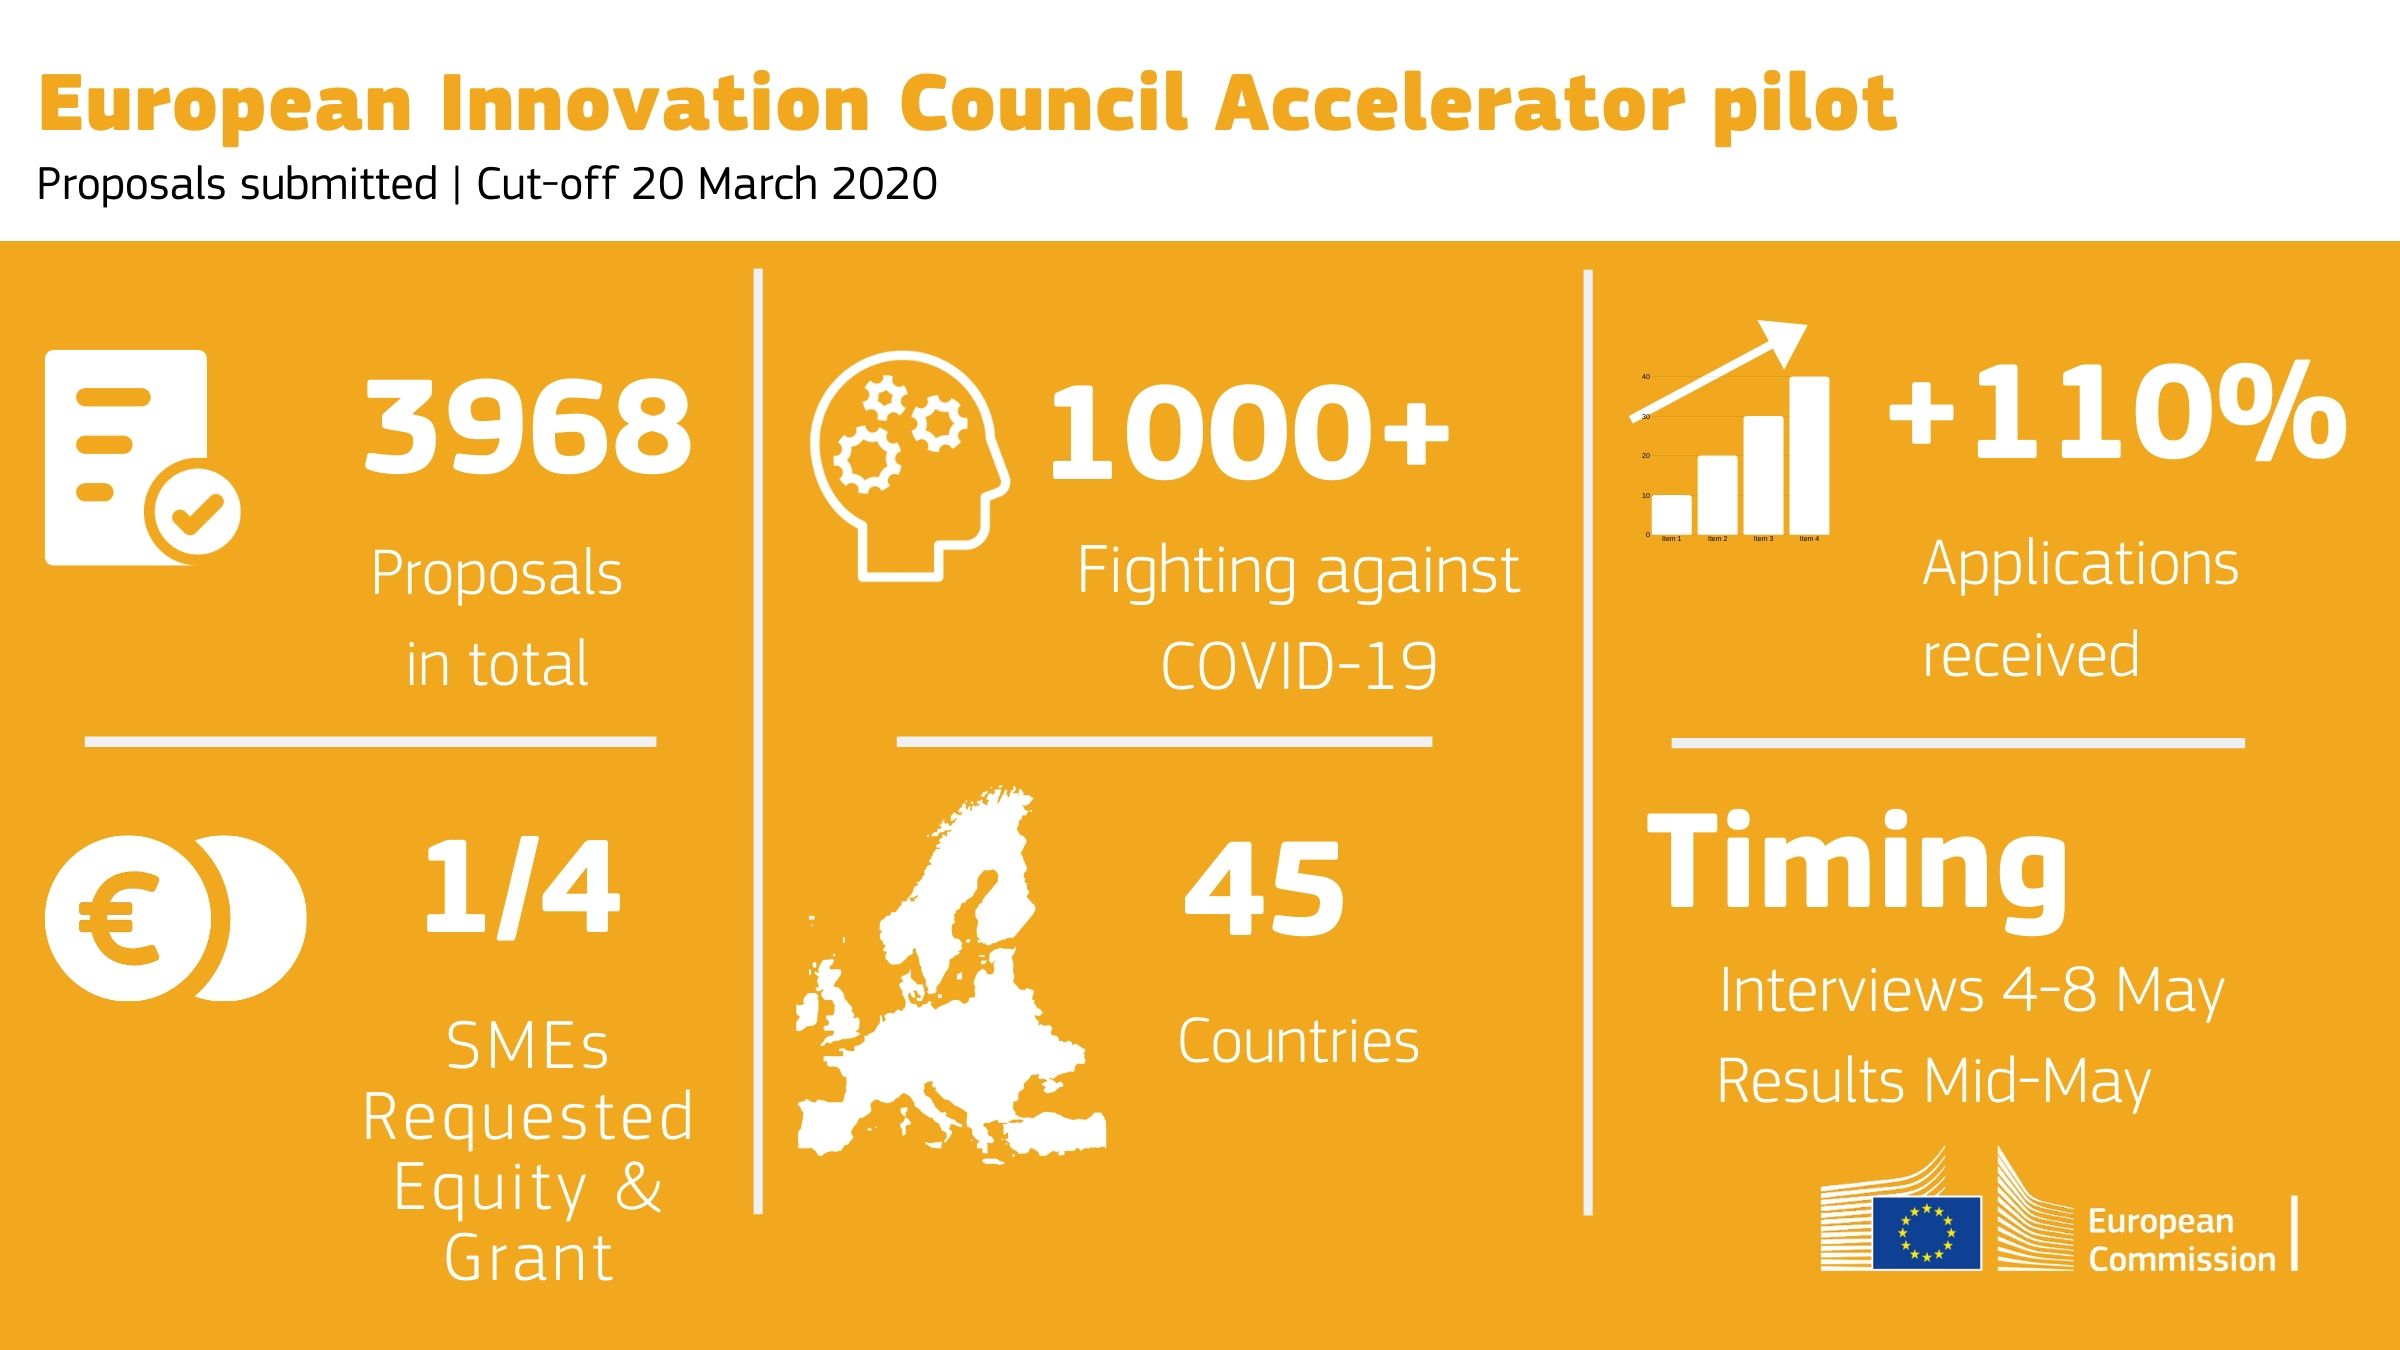 The EIC Accelerator Pilot Program sets a record for applications and receives more than 4000 requests